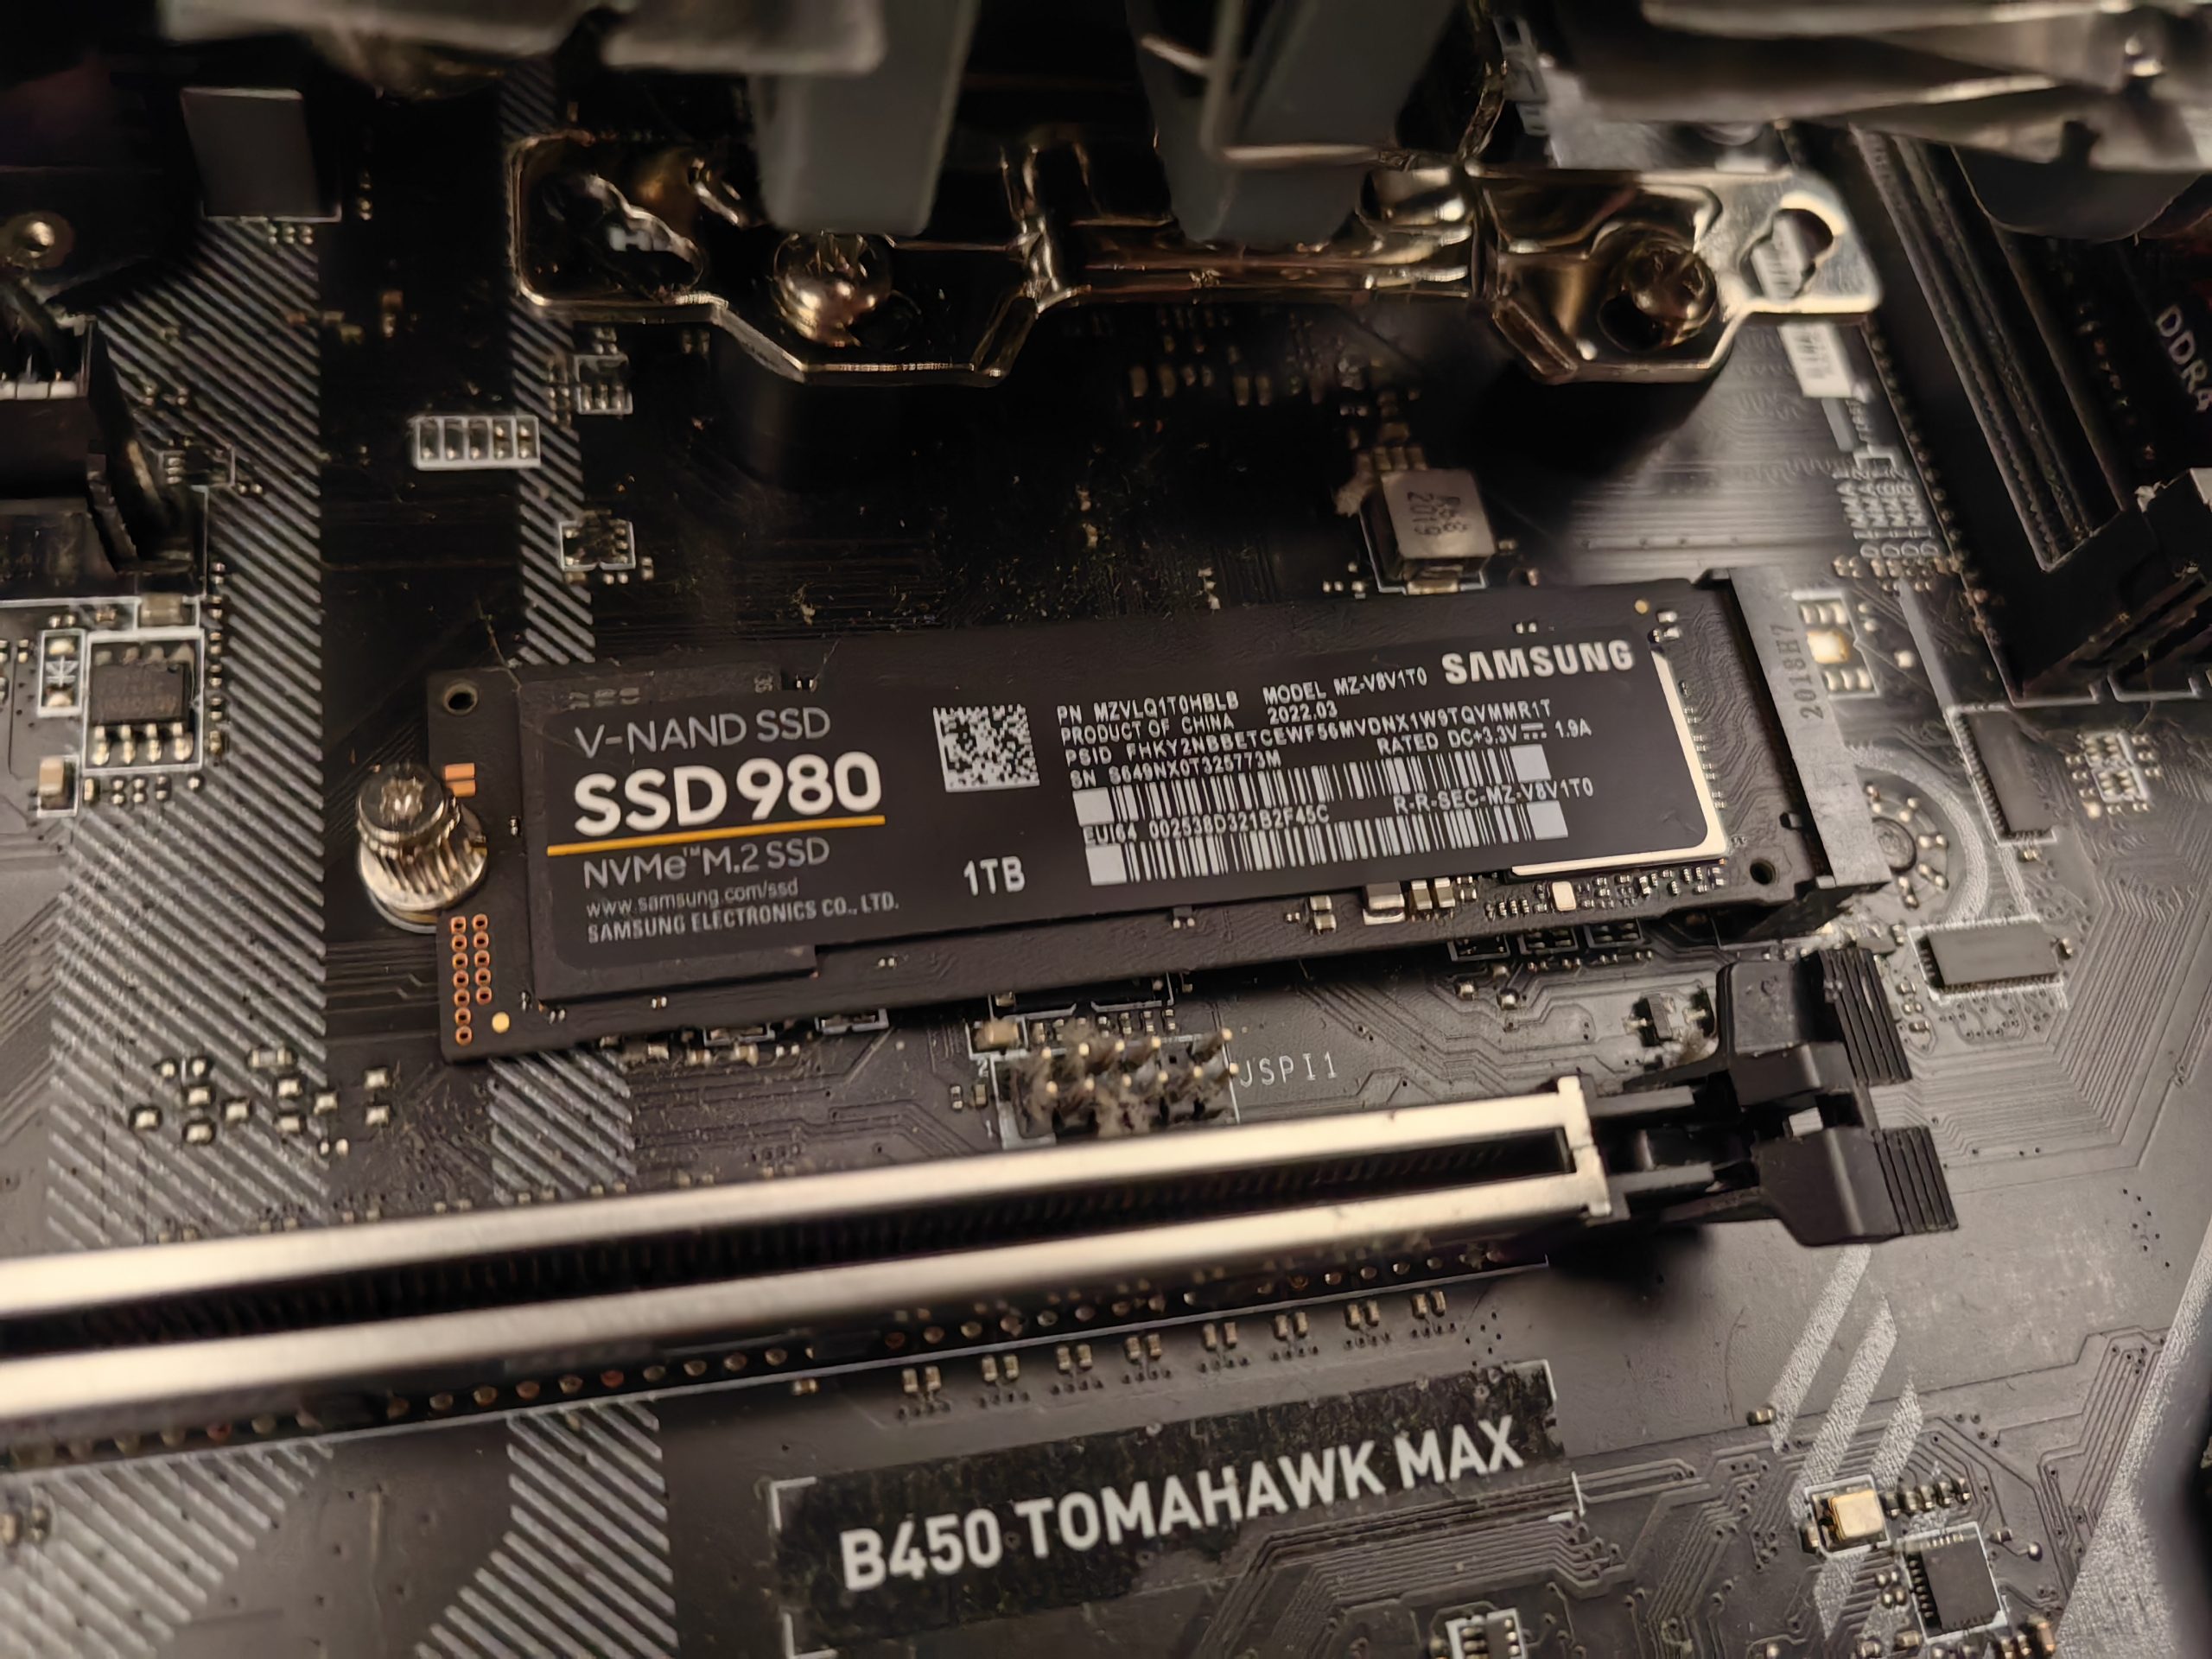  Samsung-980-SSD-disk-test-review-7